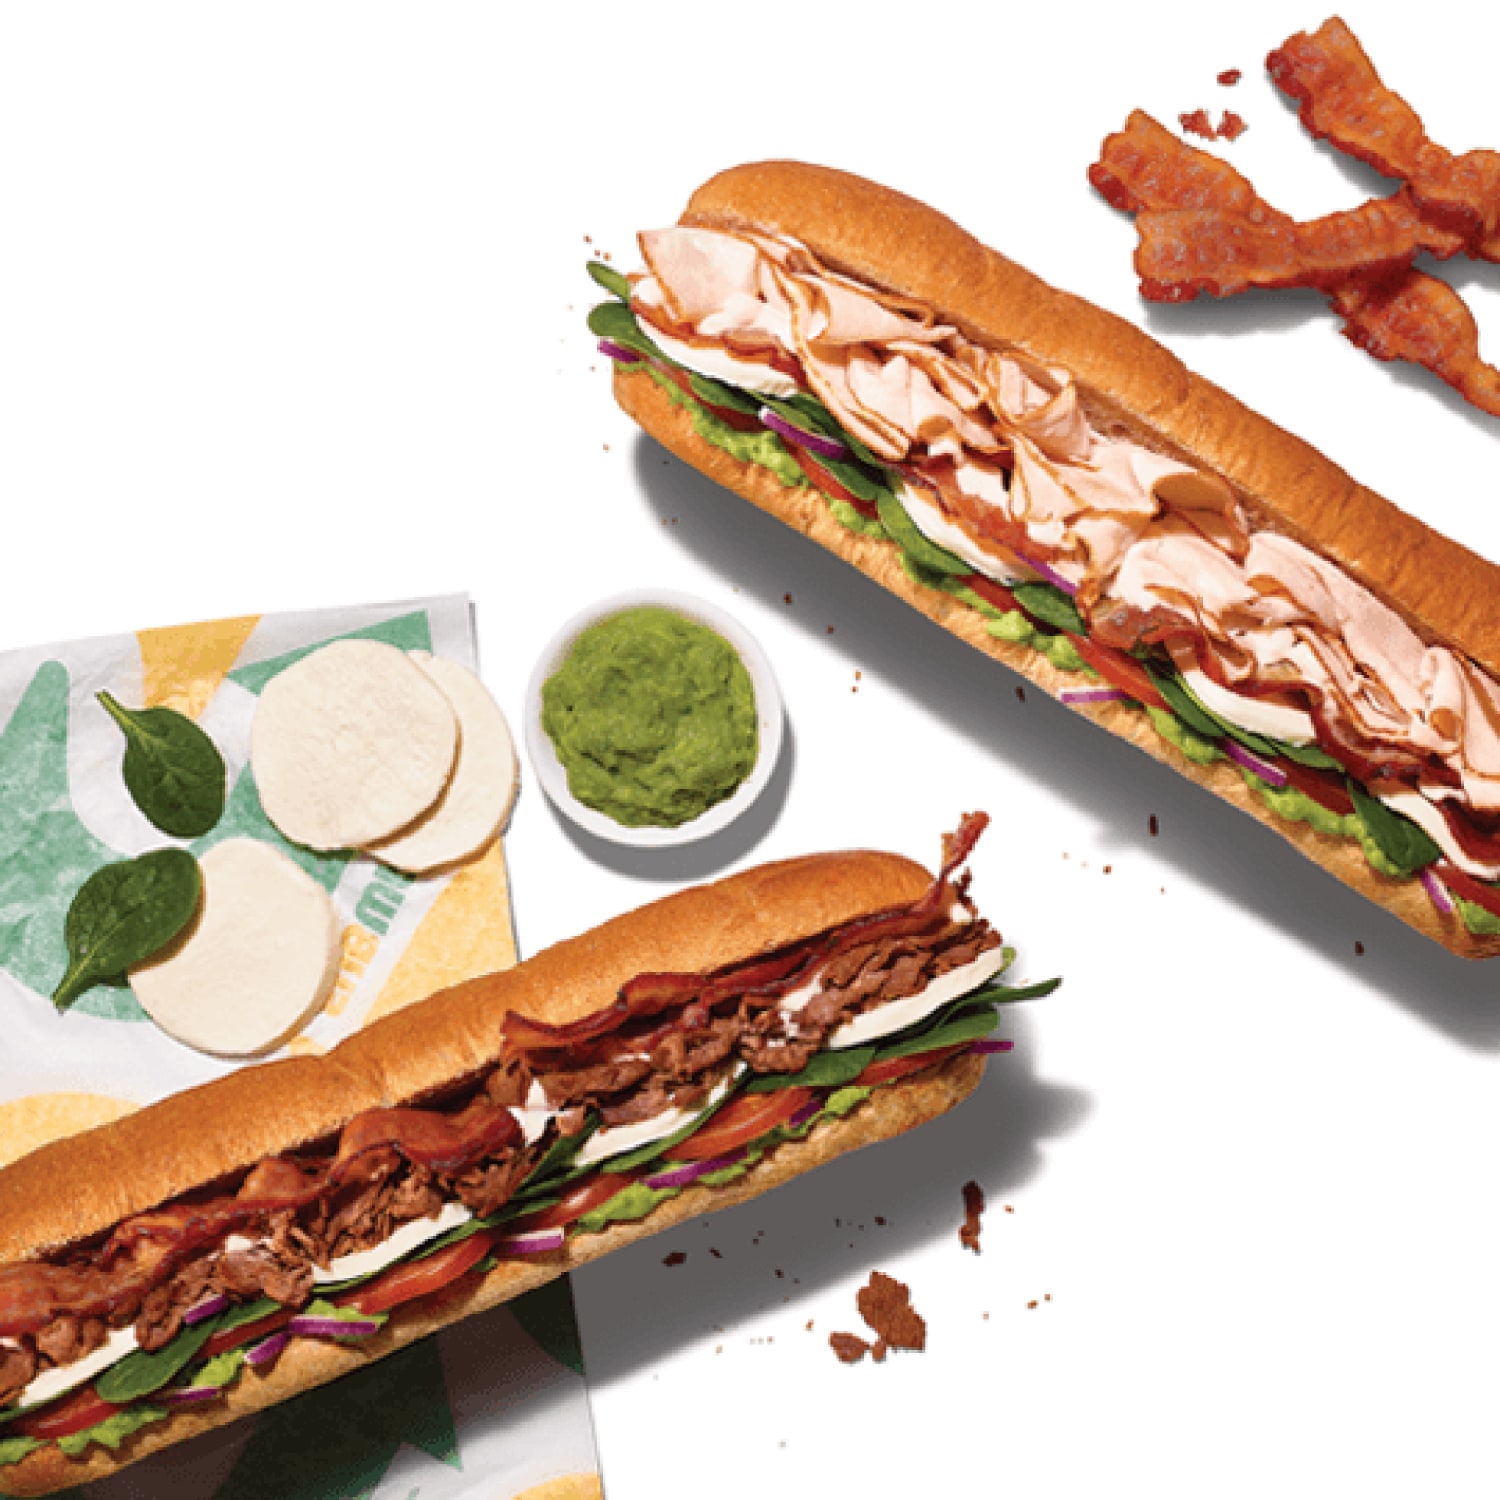 Subway Launches Most Significant Menu Change in 57 Years - QSR Magazine